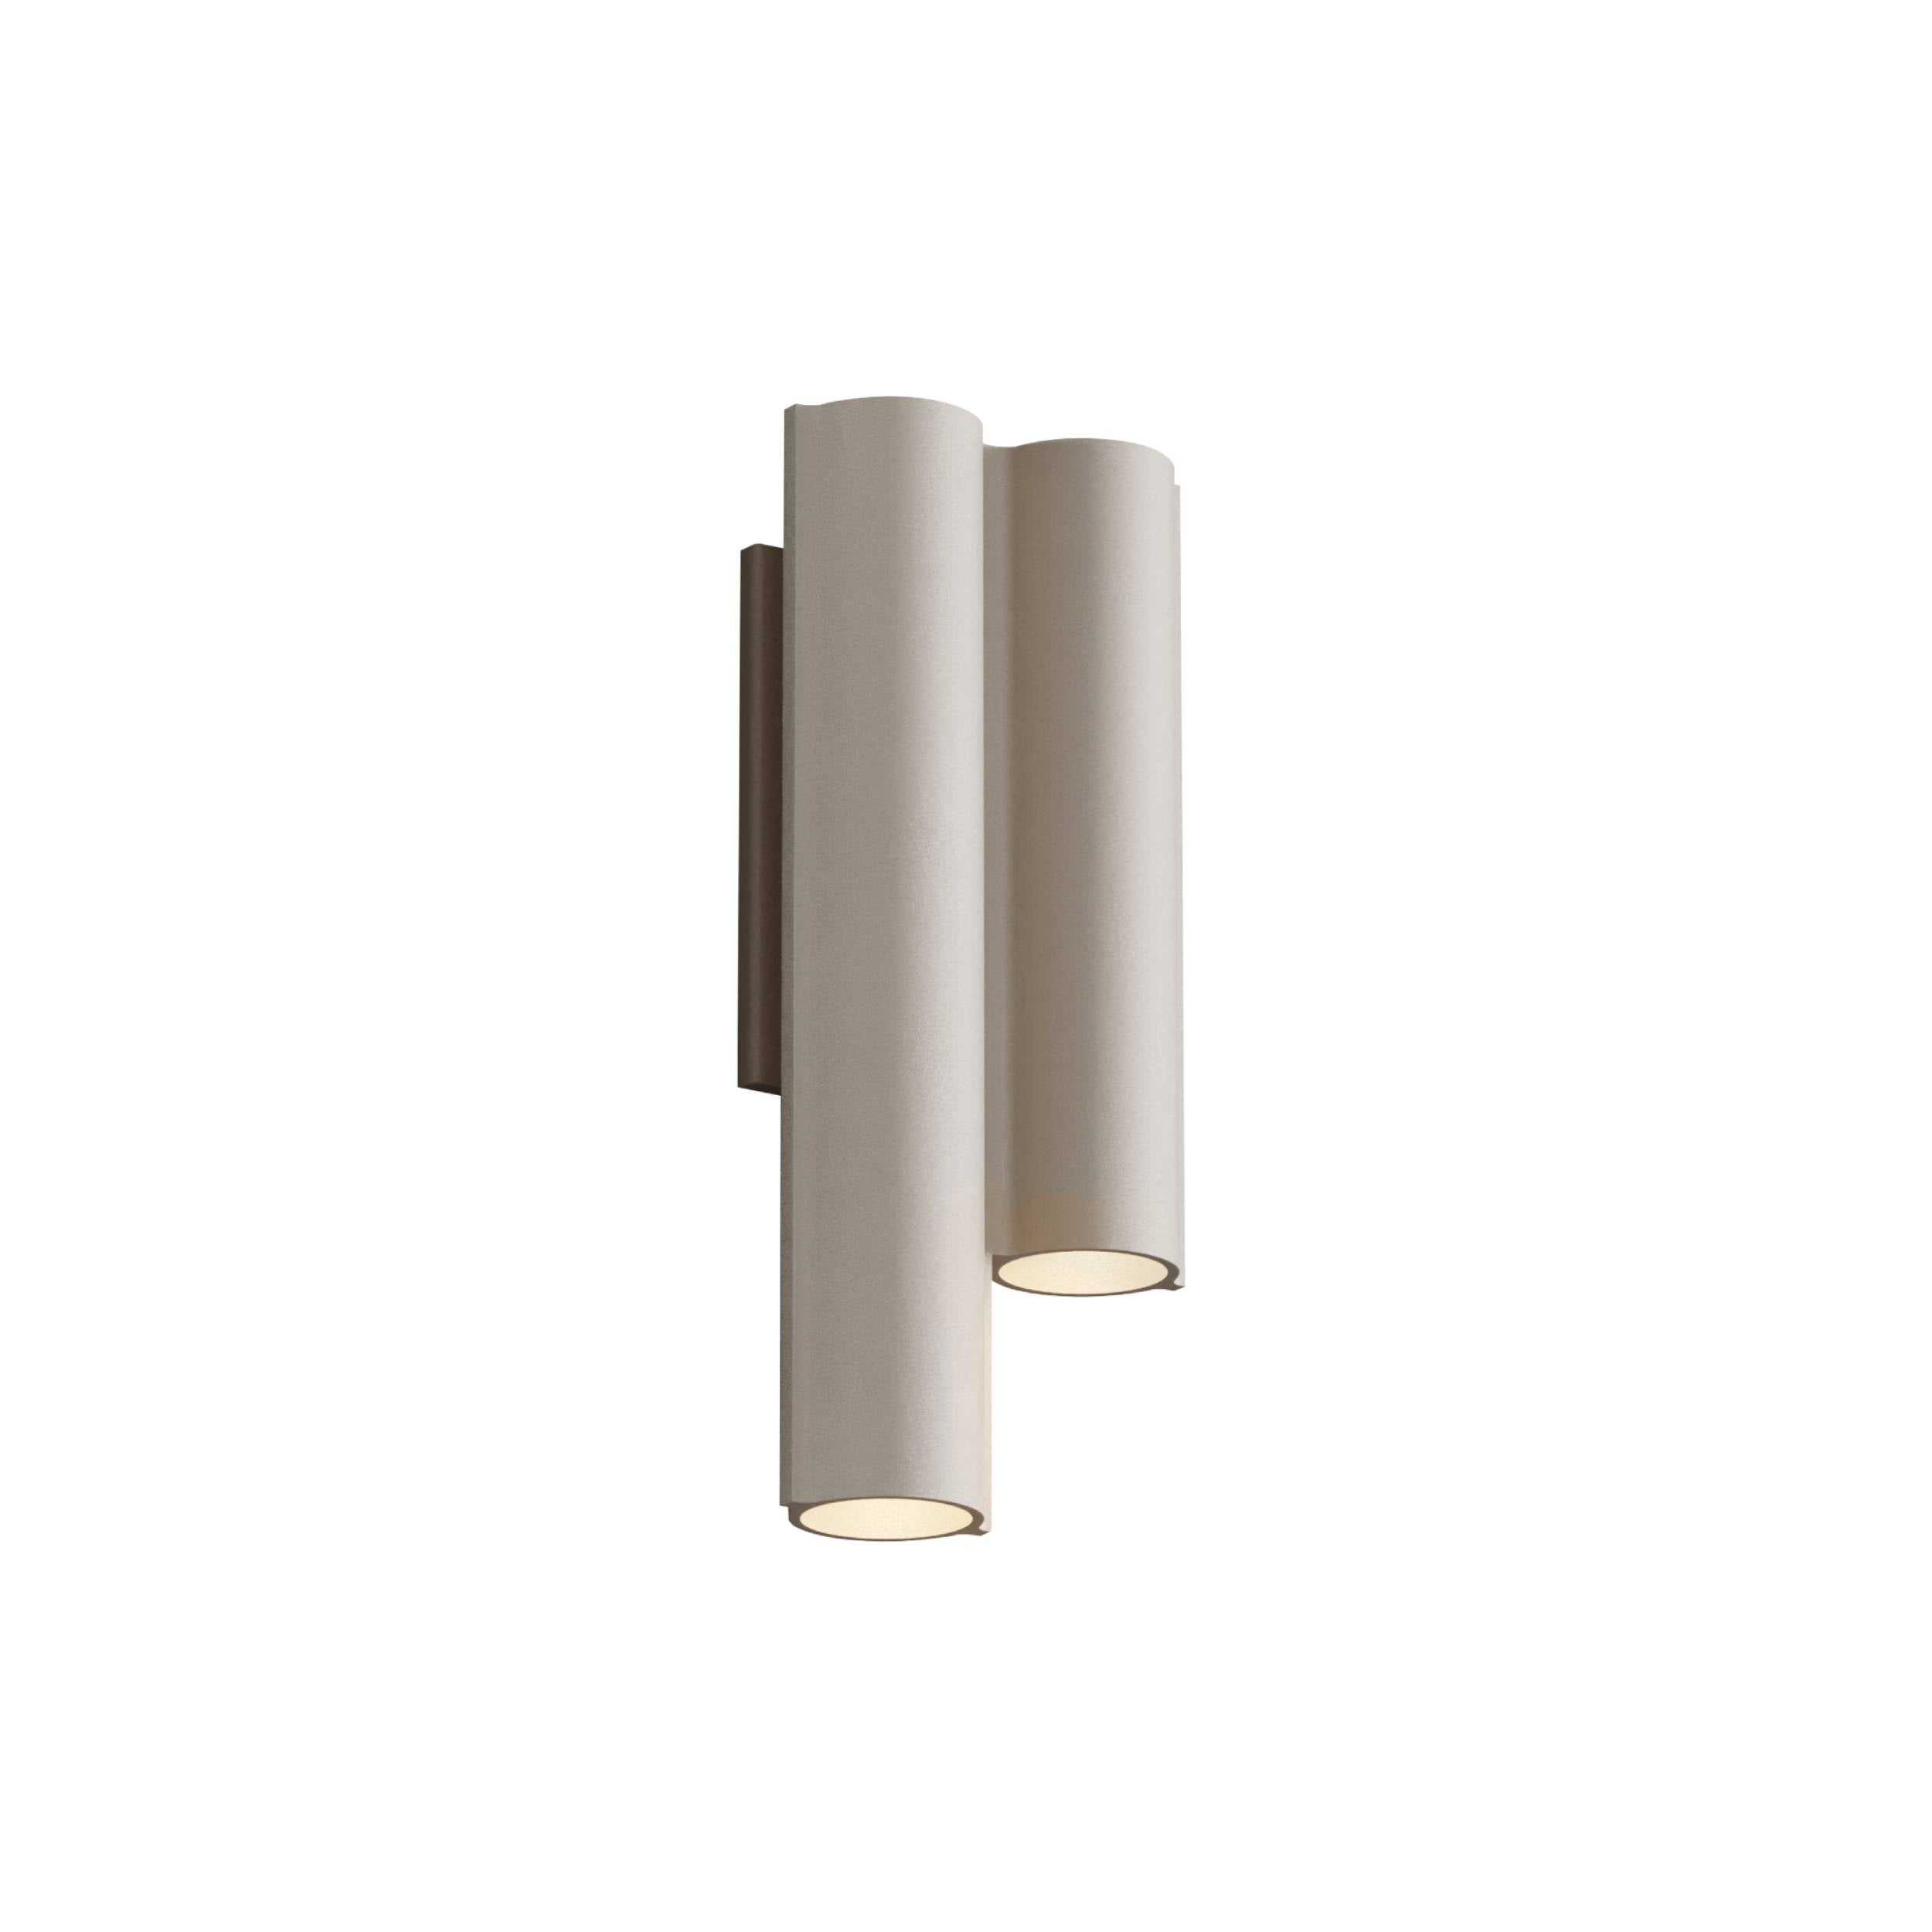 Silo 2WC Wall Light: Downlight with Uplight + Beige